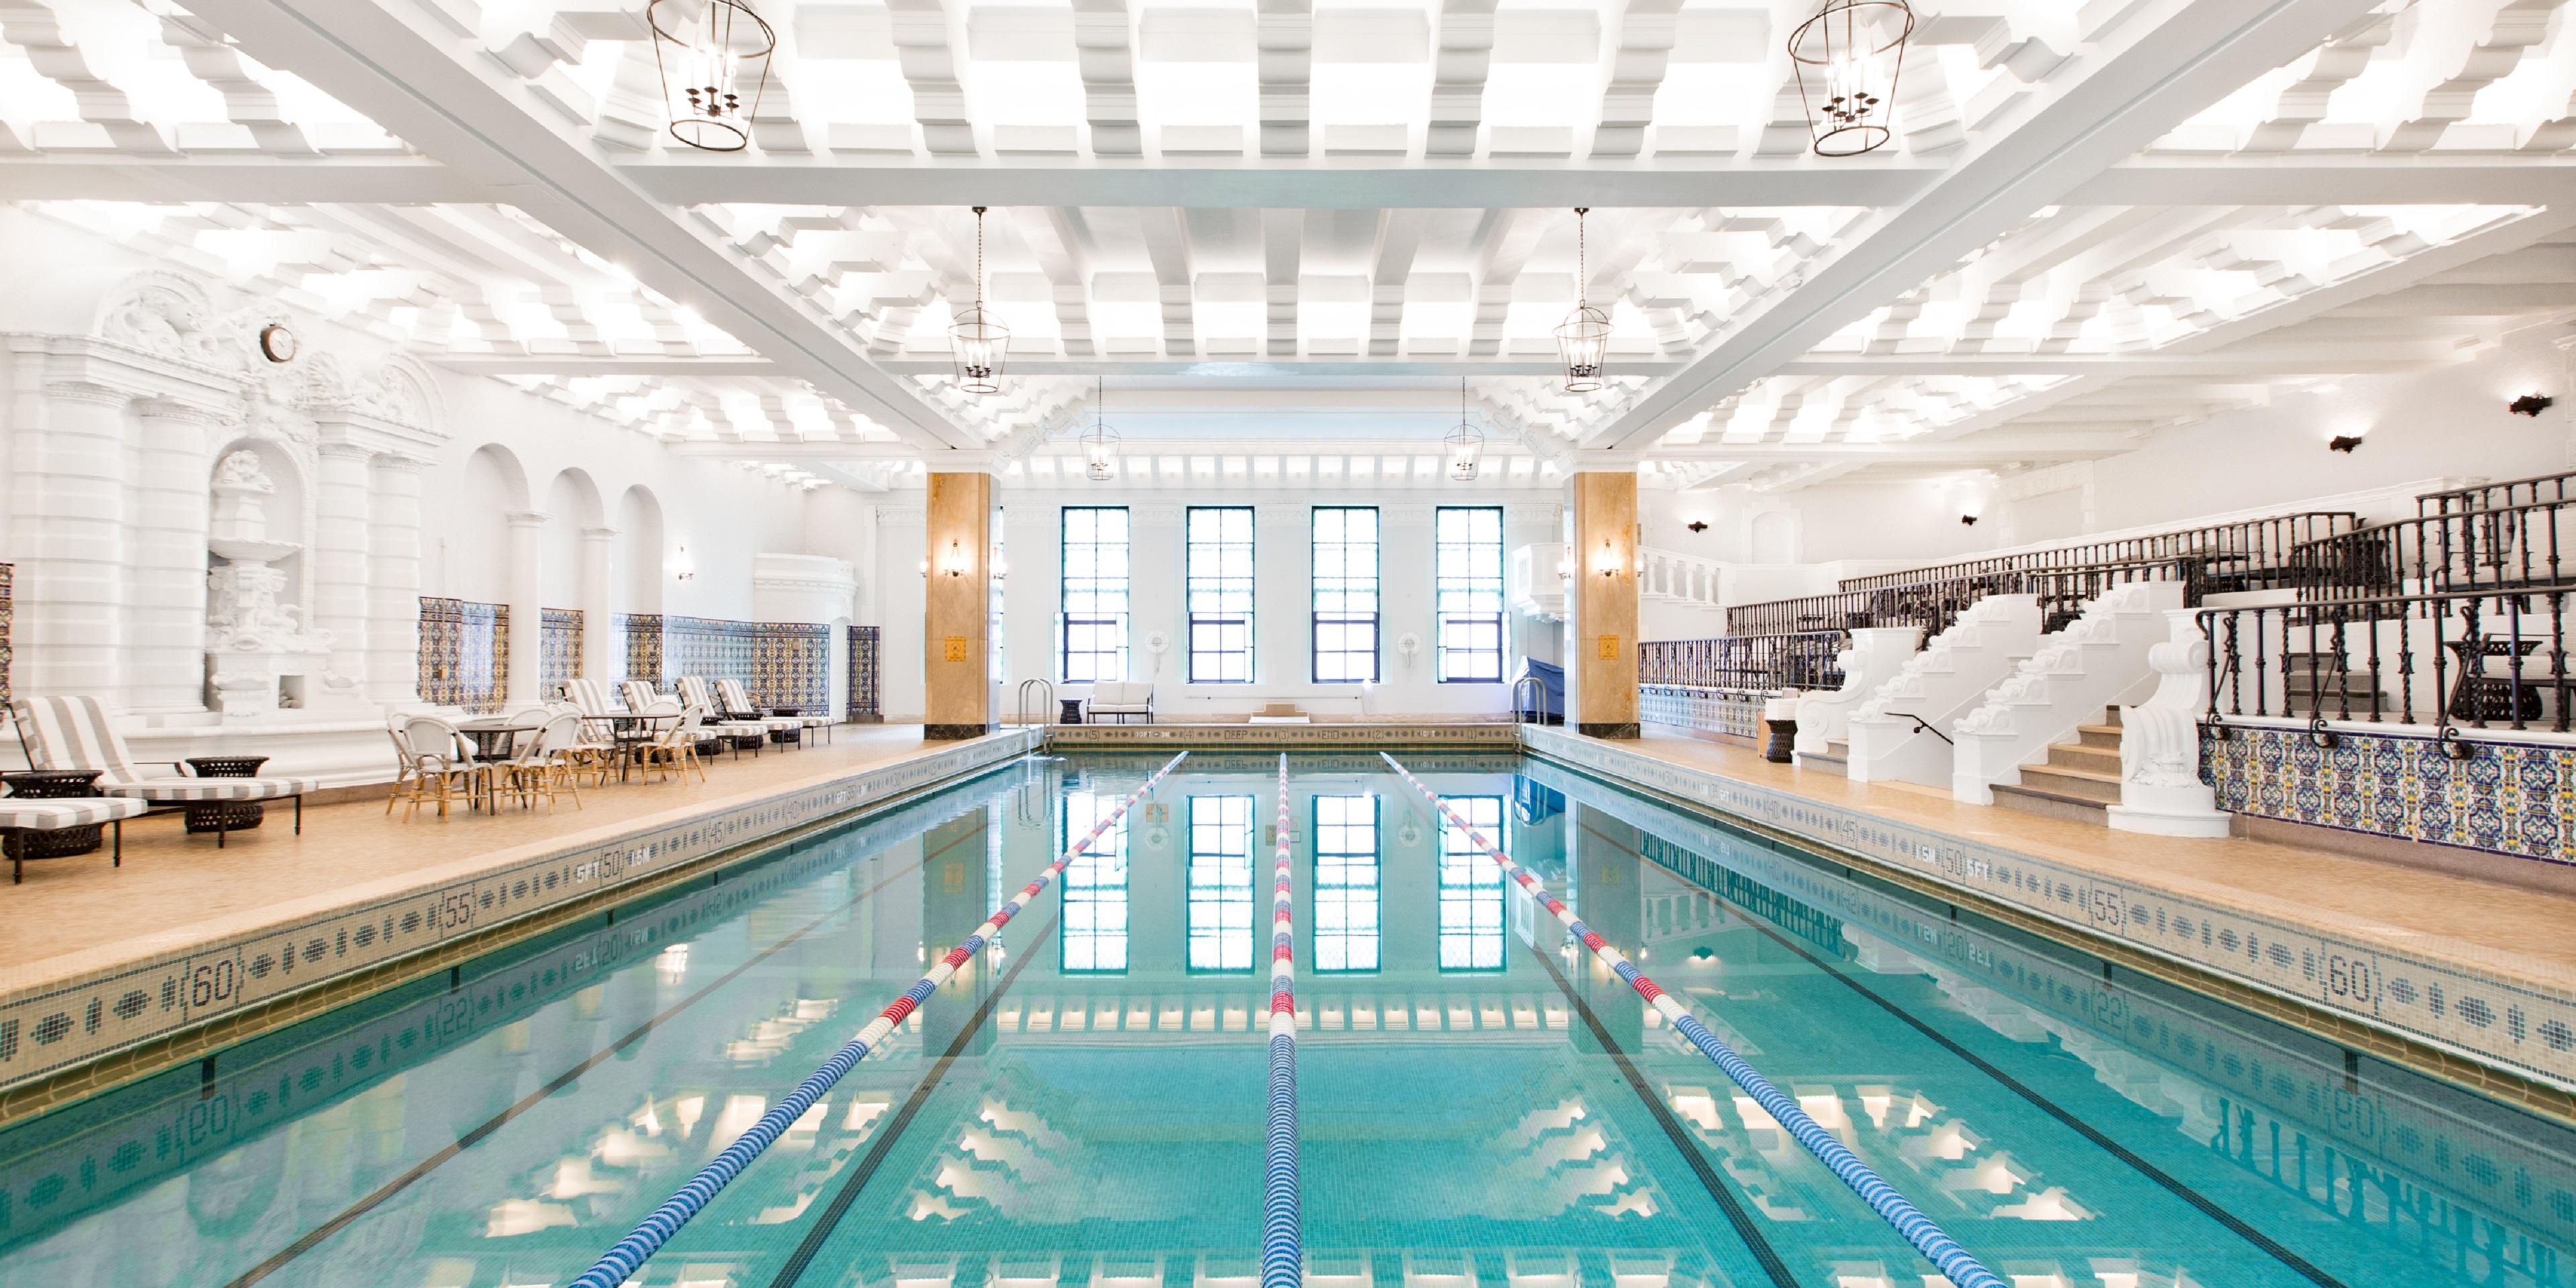 Downtown Chicago’s most luxurious wellness escape, our beautiful spa spans three stories and includes private treatment rooms, two Finnish saunas, and a premier Fitness Center. A highlight is the historic indoor junior Olympic swimming pool — with original 1920s Spanish tiles, and a terra cotta Neptune fountain.